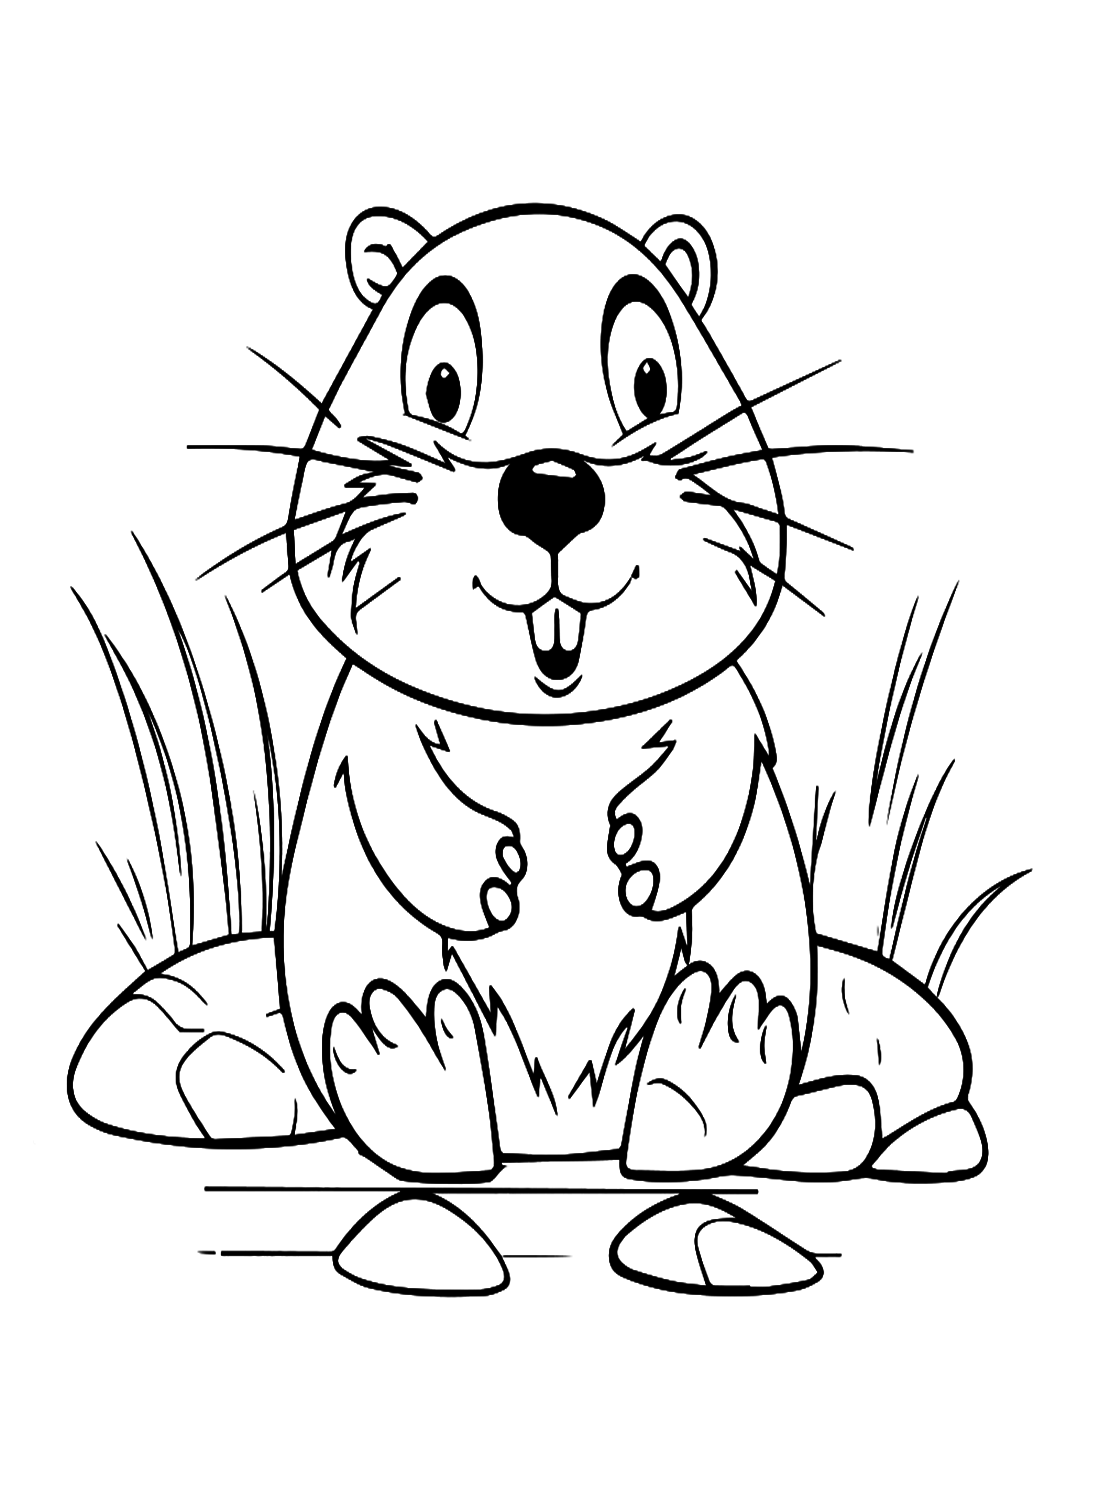 Guinea Pig Sitting On Ground Coloring Pages